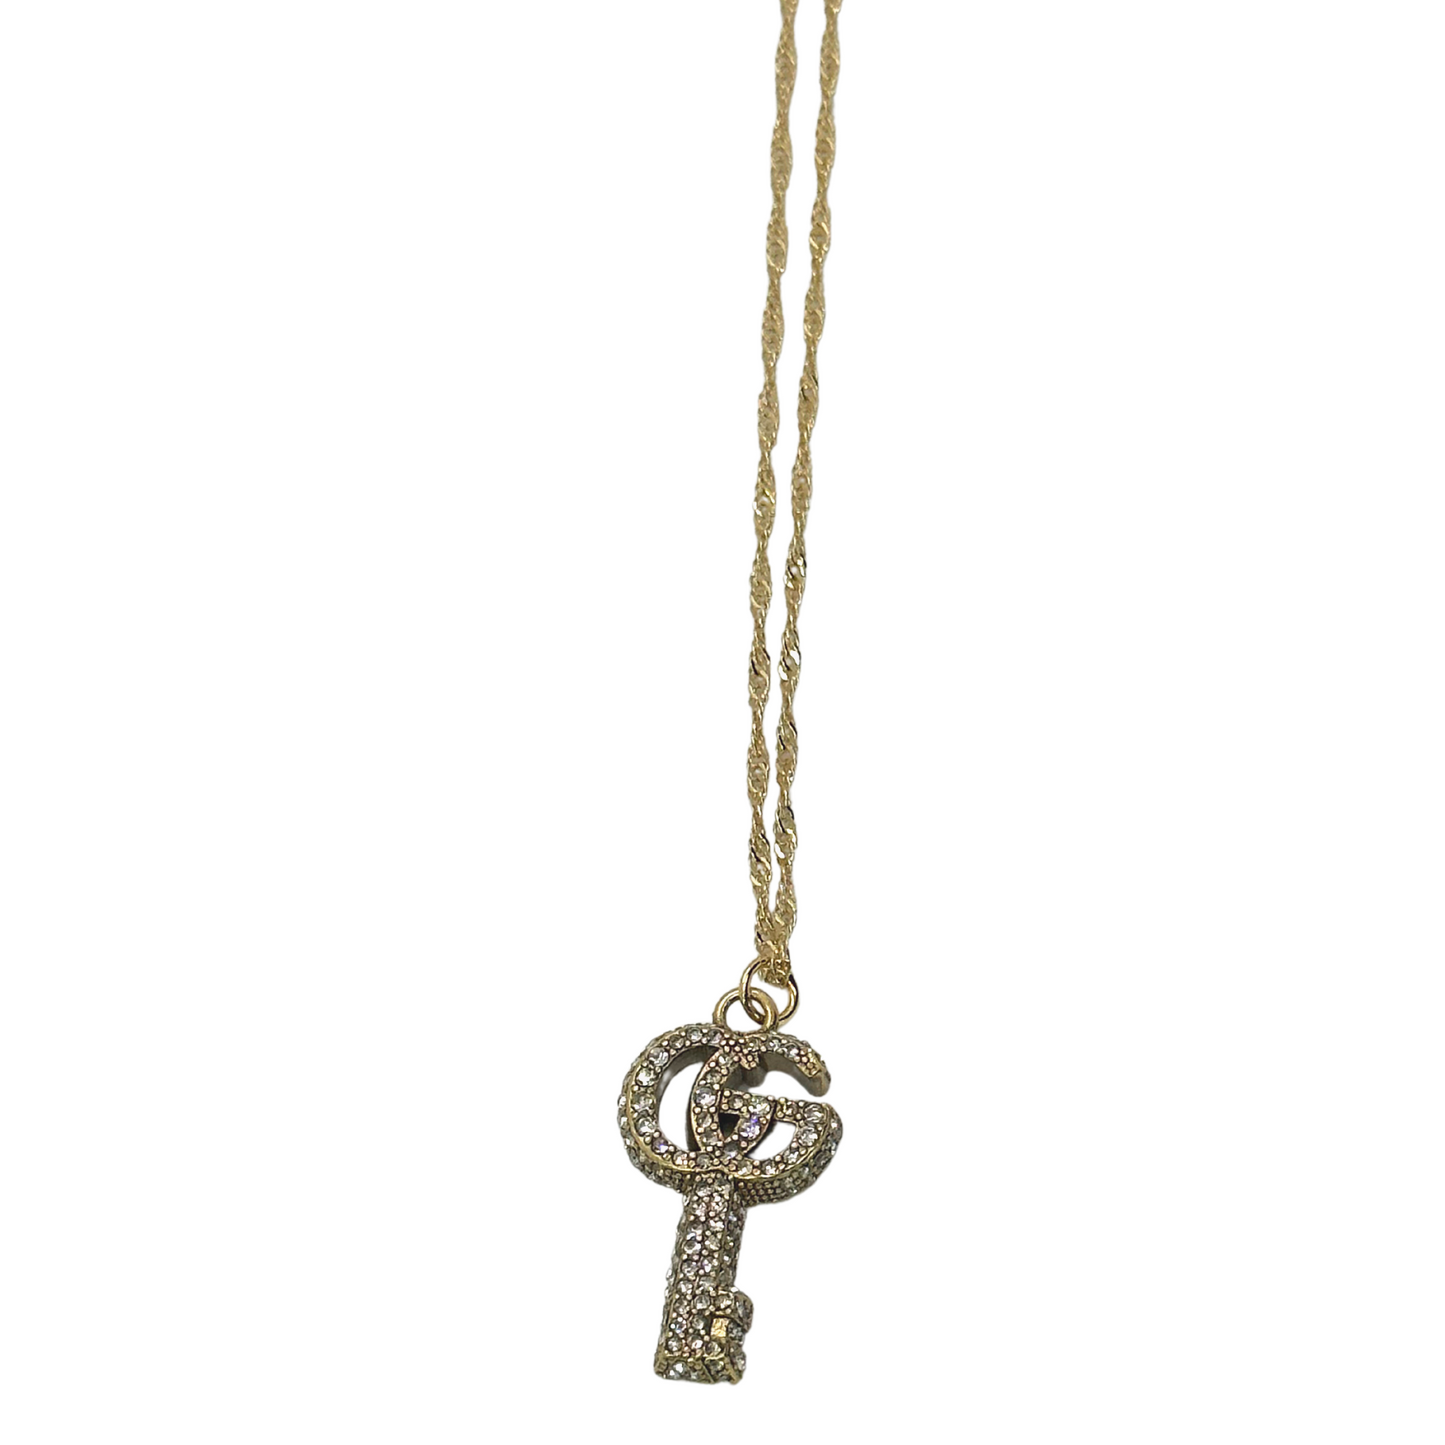 Authentic Gucci Double G Key | Reworked Gold 16" Necklace